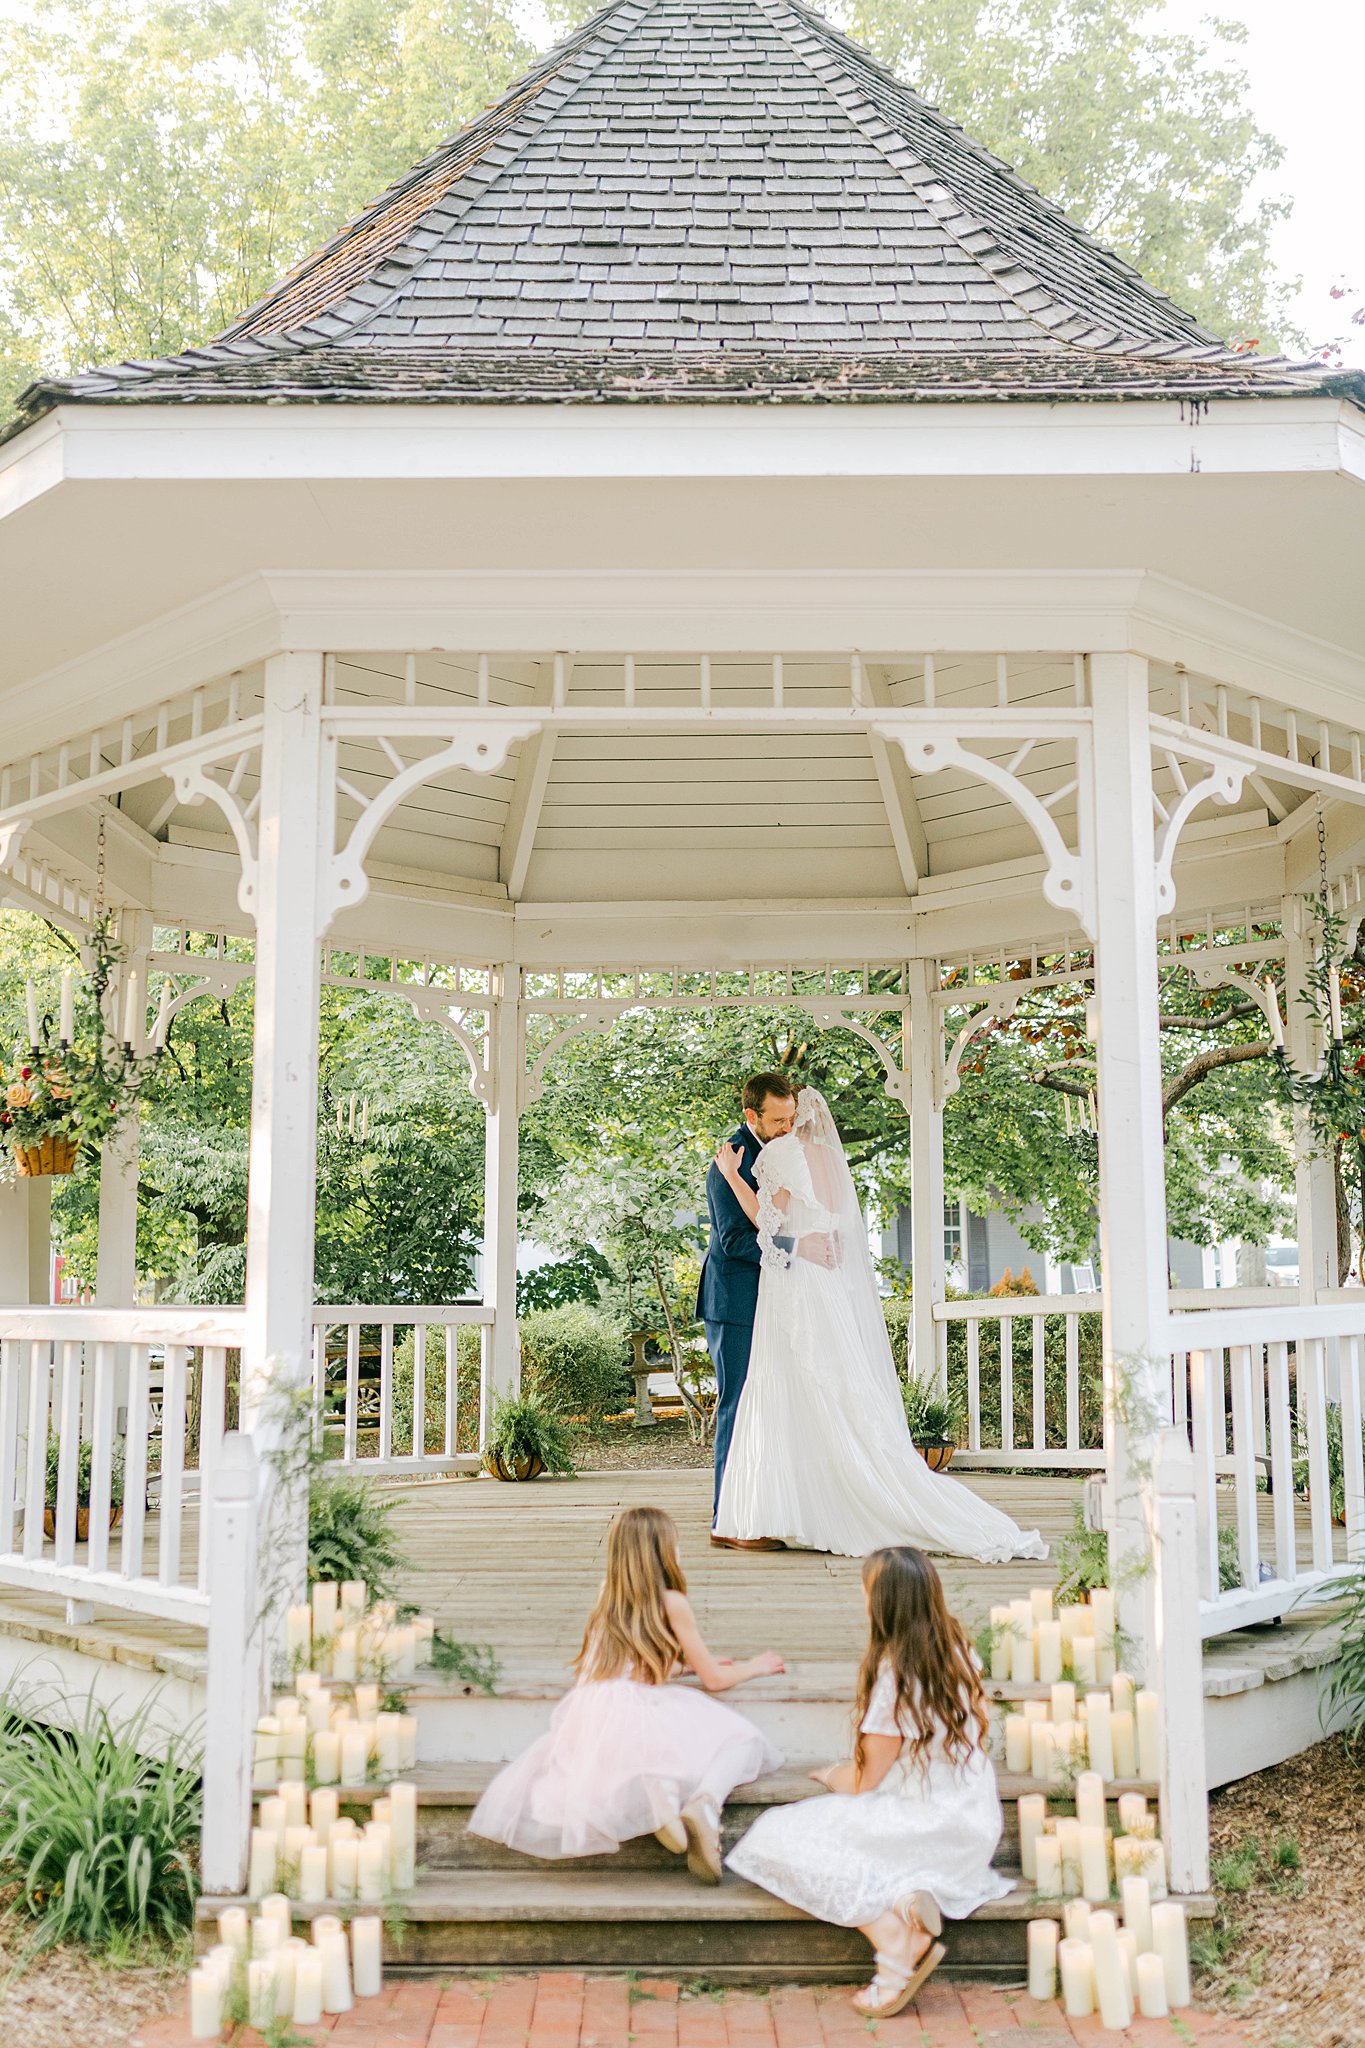 Bride and groom share their first dance under the gazebo at a park in Zionsville, Indiana. Two little girls sit on the steps of the gazebo watching.